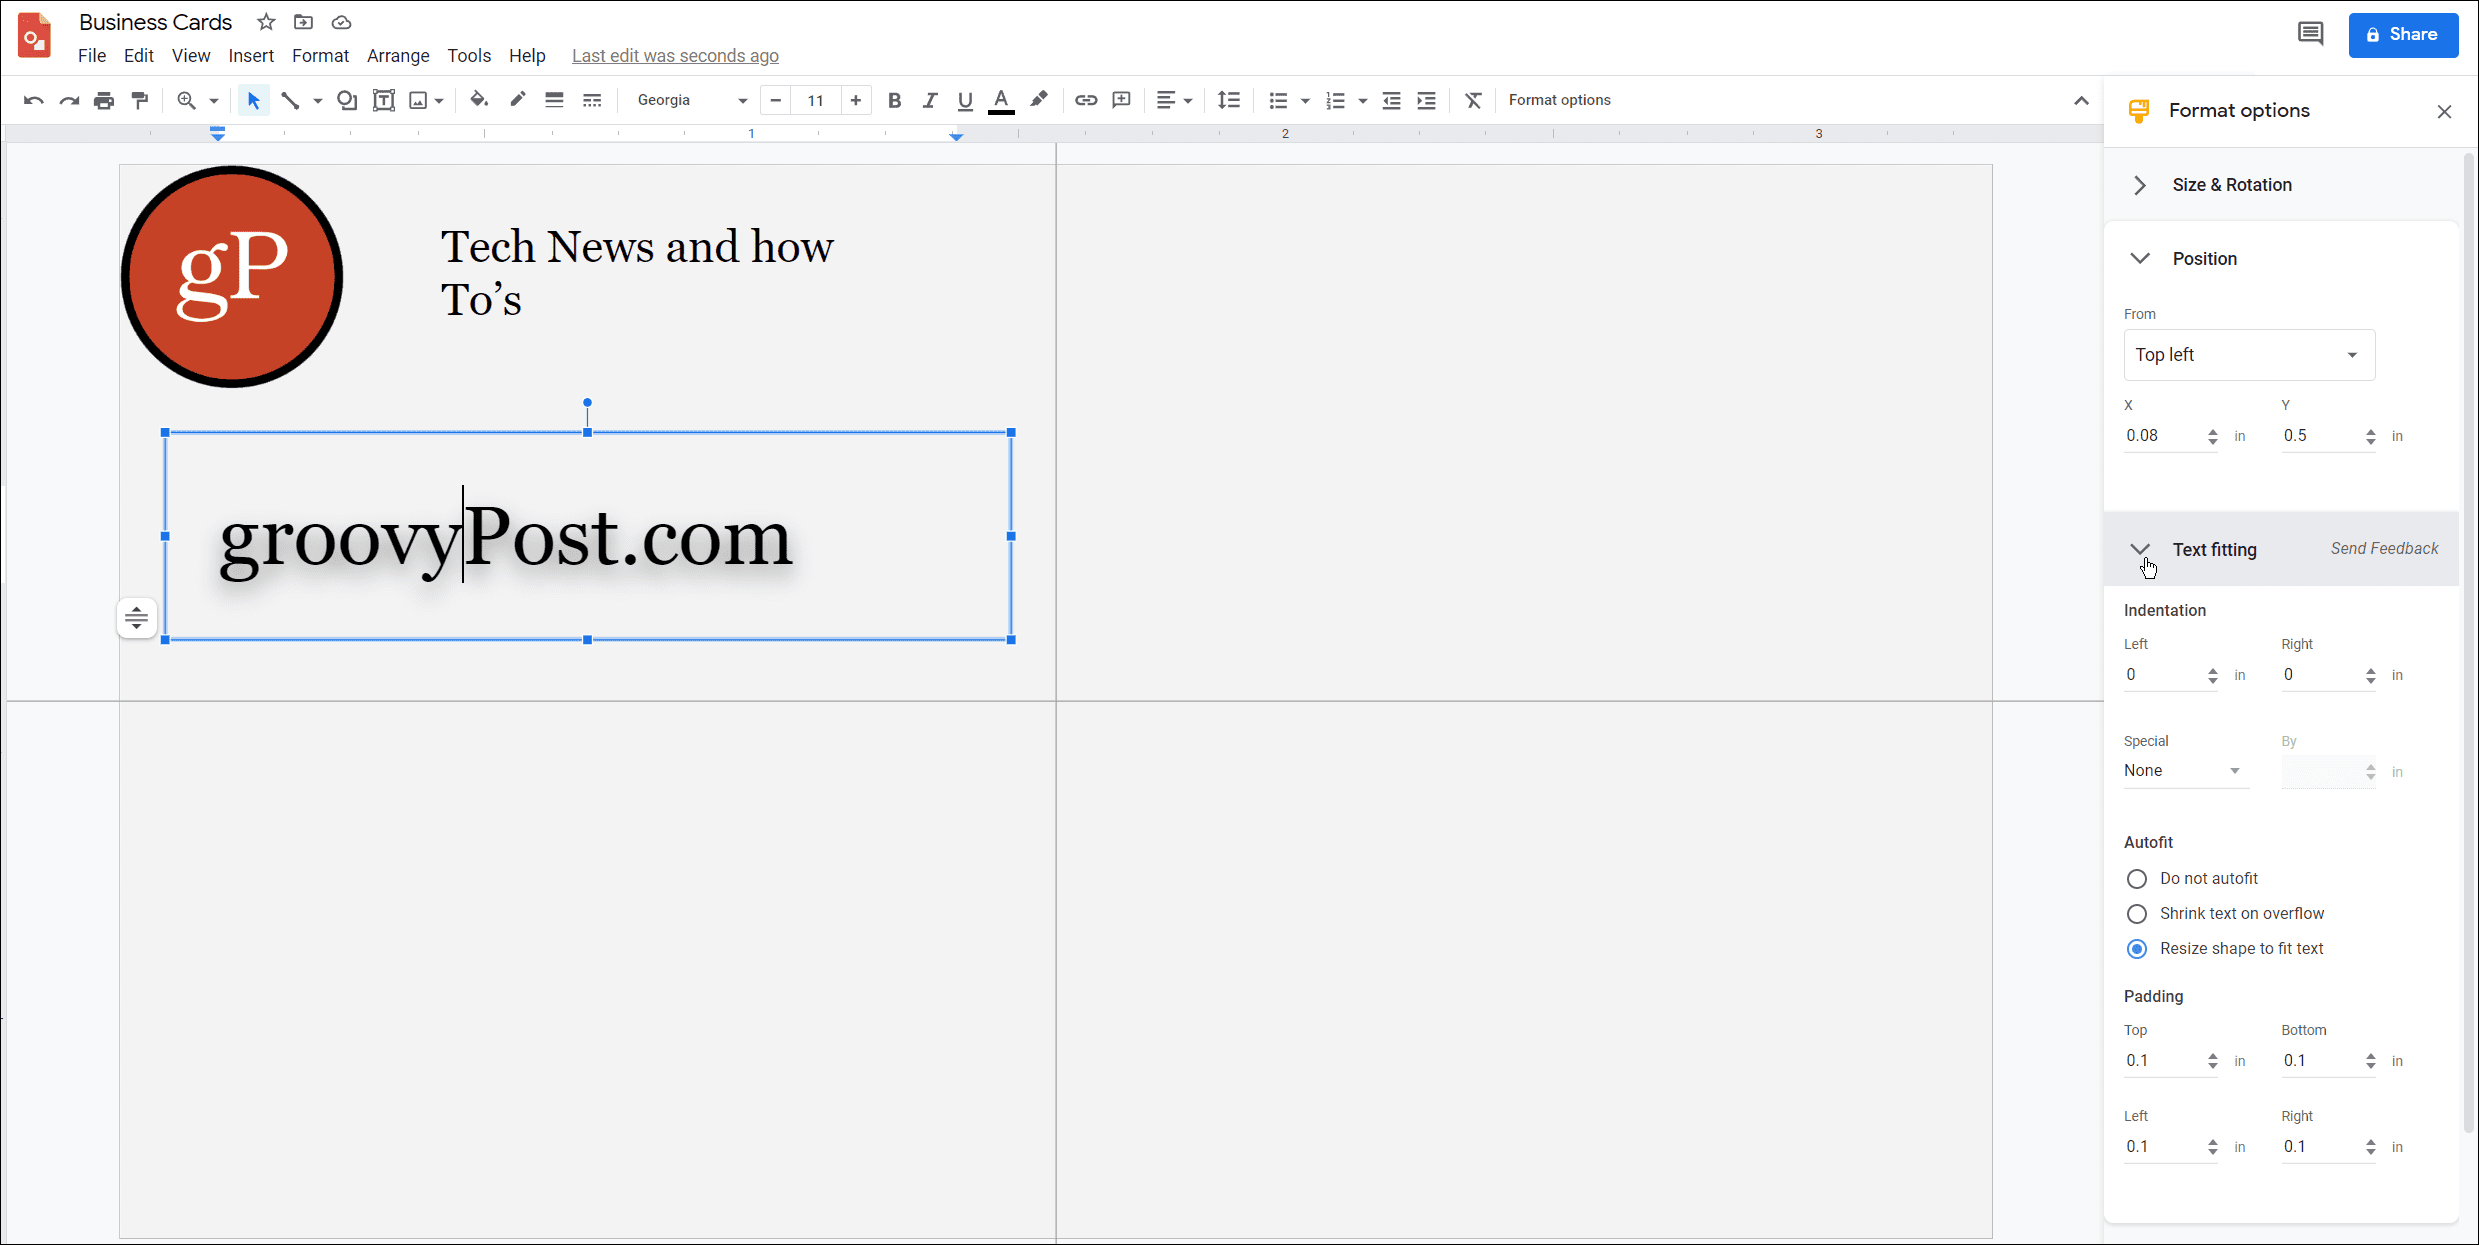 Format Options how to make cards on google docs